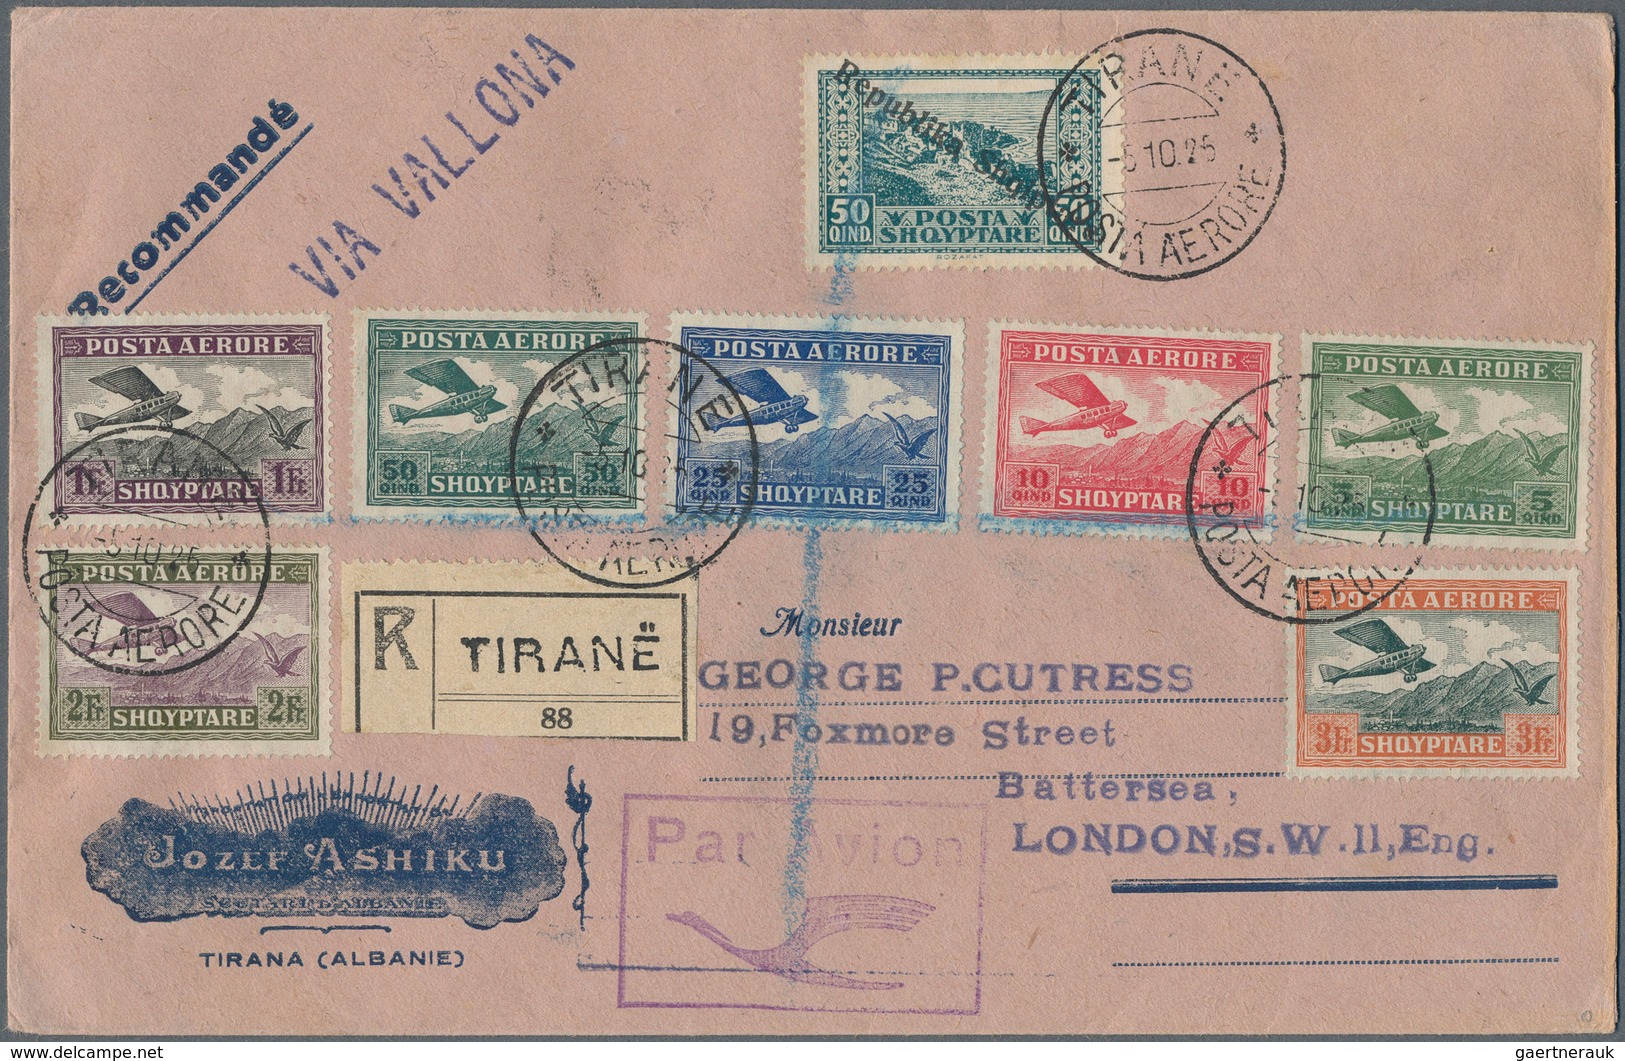 Flugpost Alle Welt: 1918/1954, mainly before 1945, collection of more than 340 airmail cover/cards,